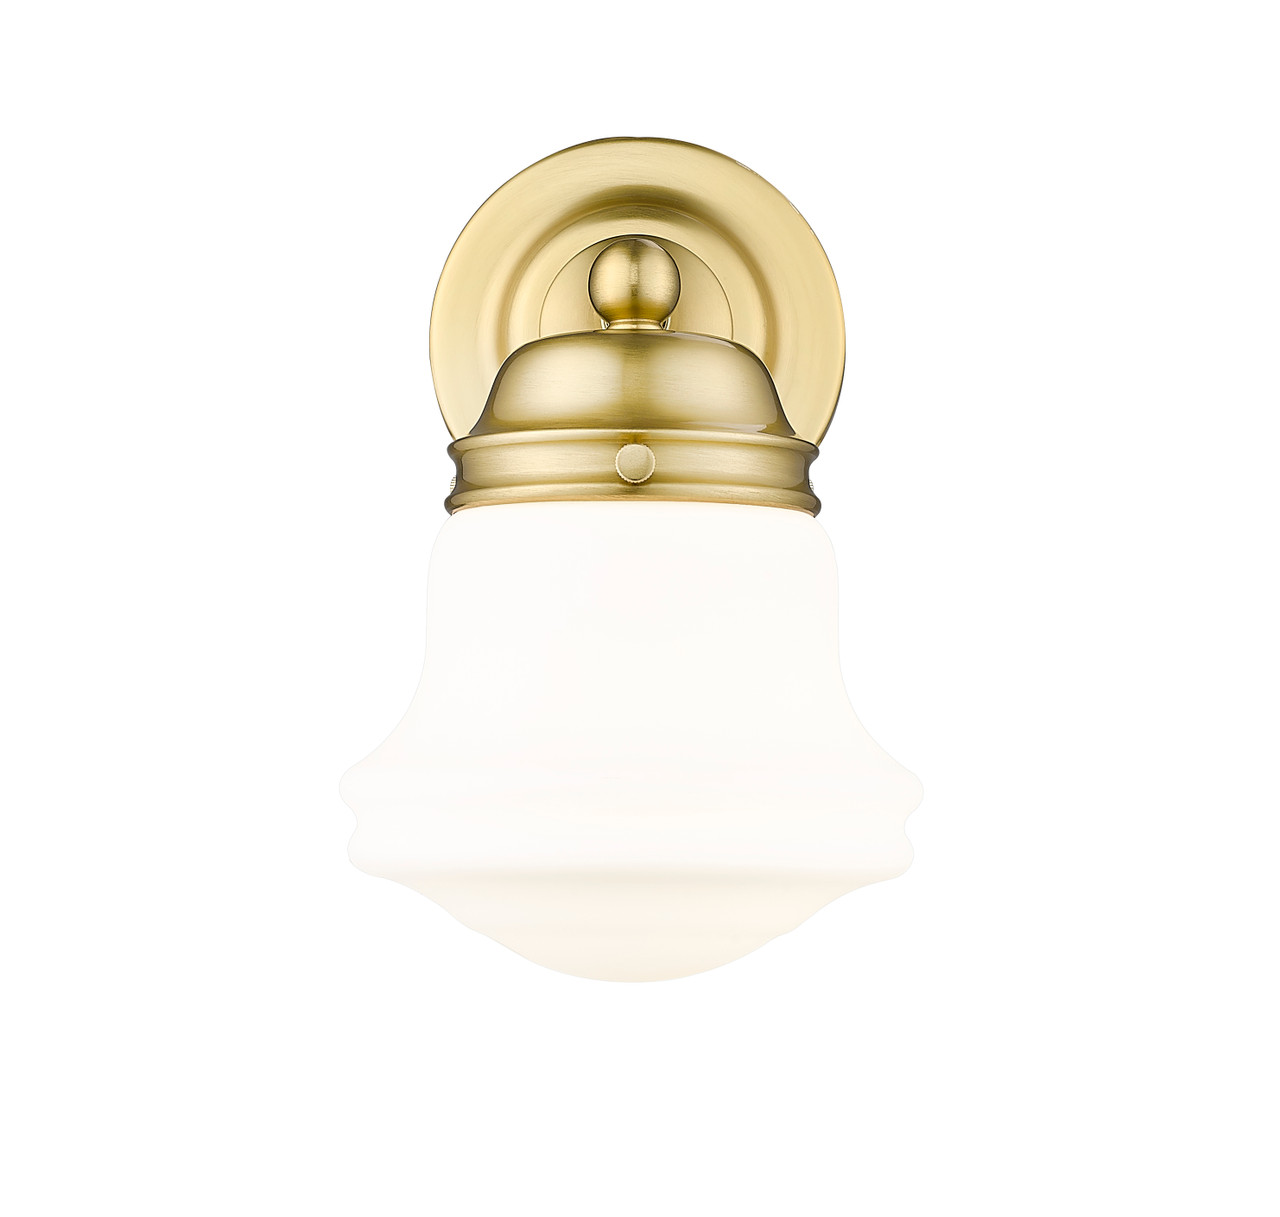 Z-LITE 735-1S-LG 1 Light Wall Sconce, Luxe Gold